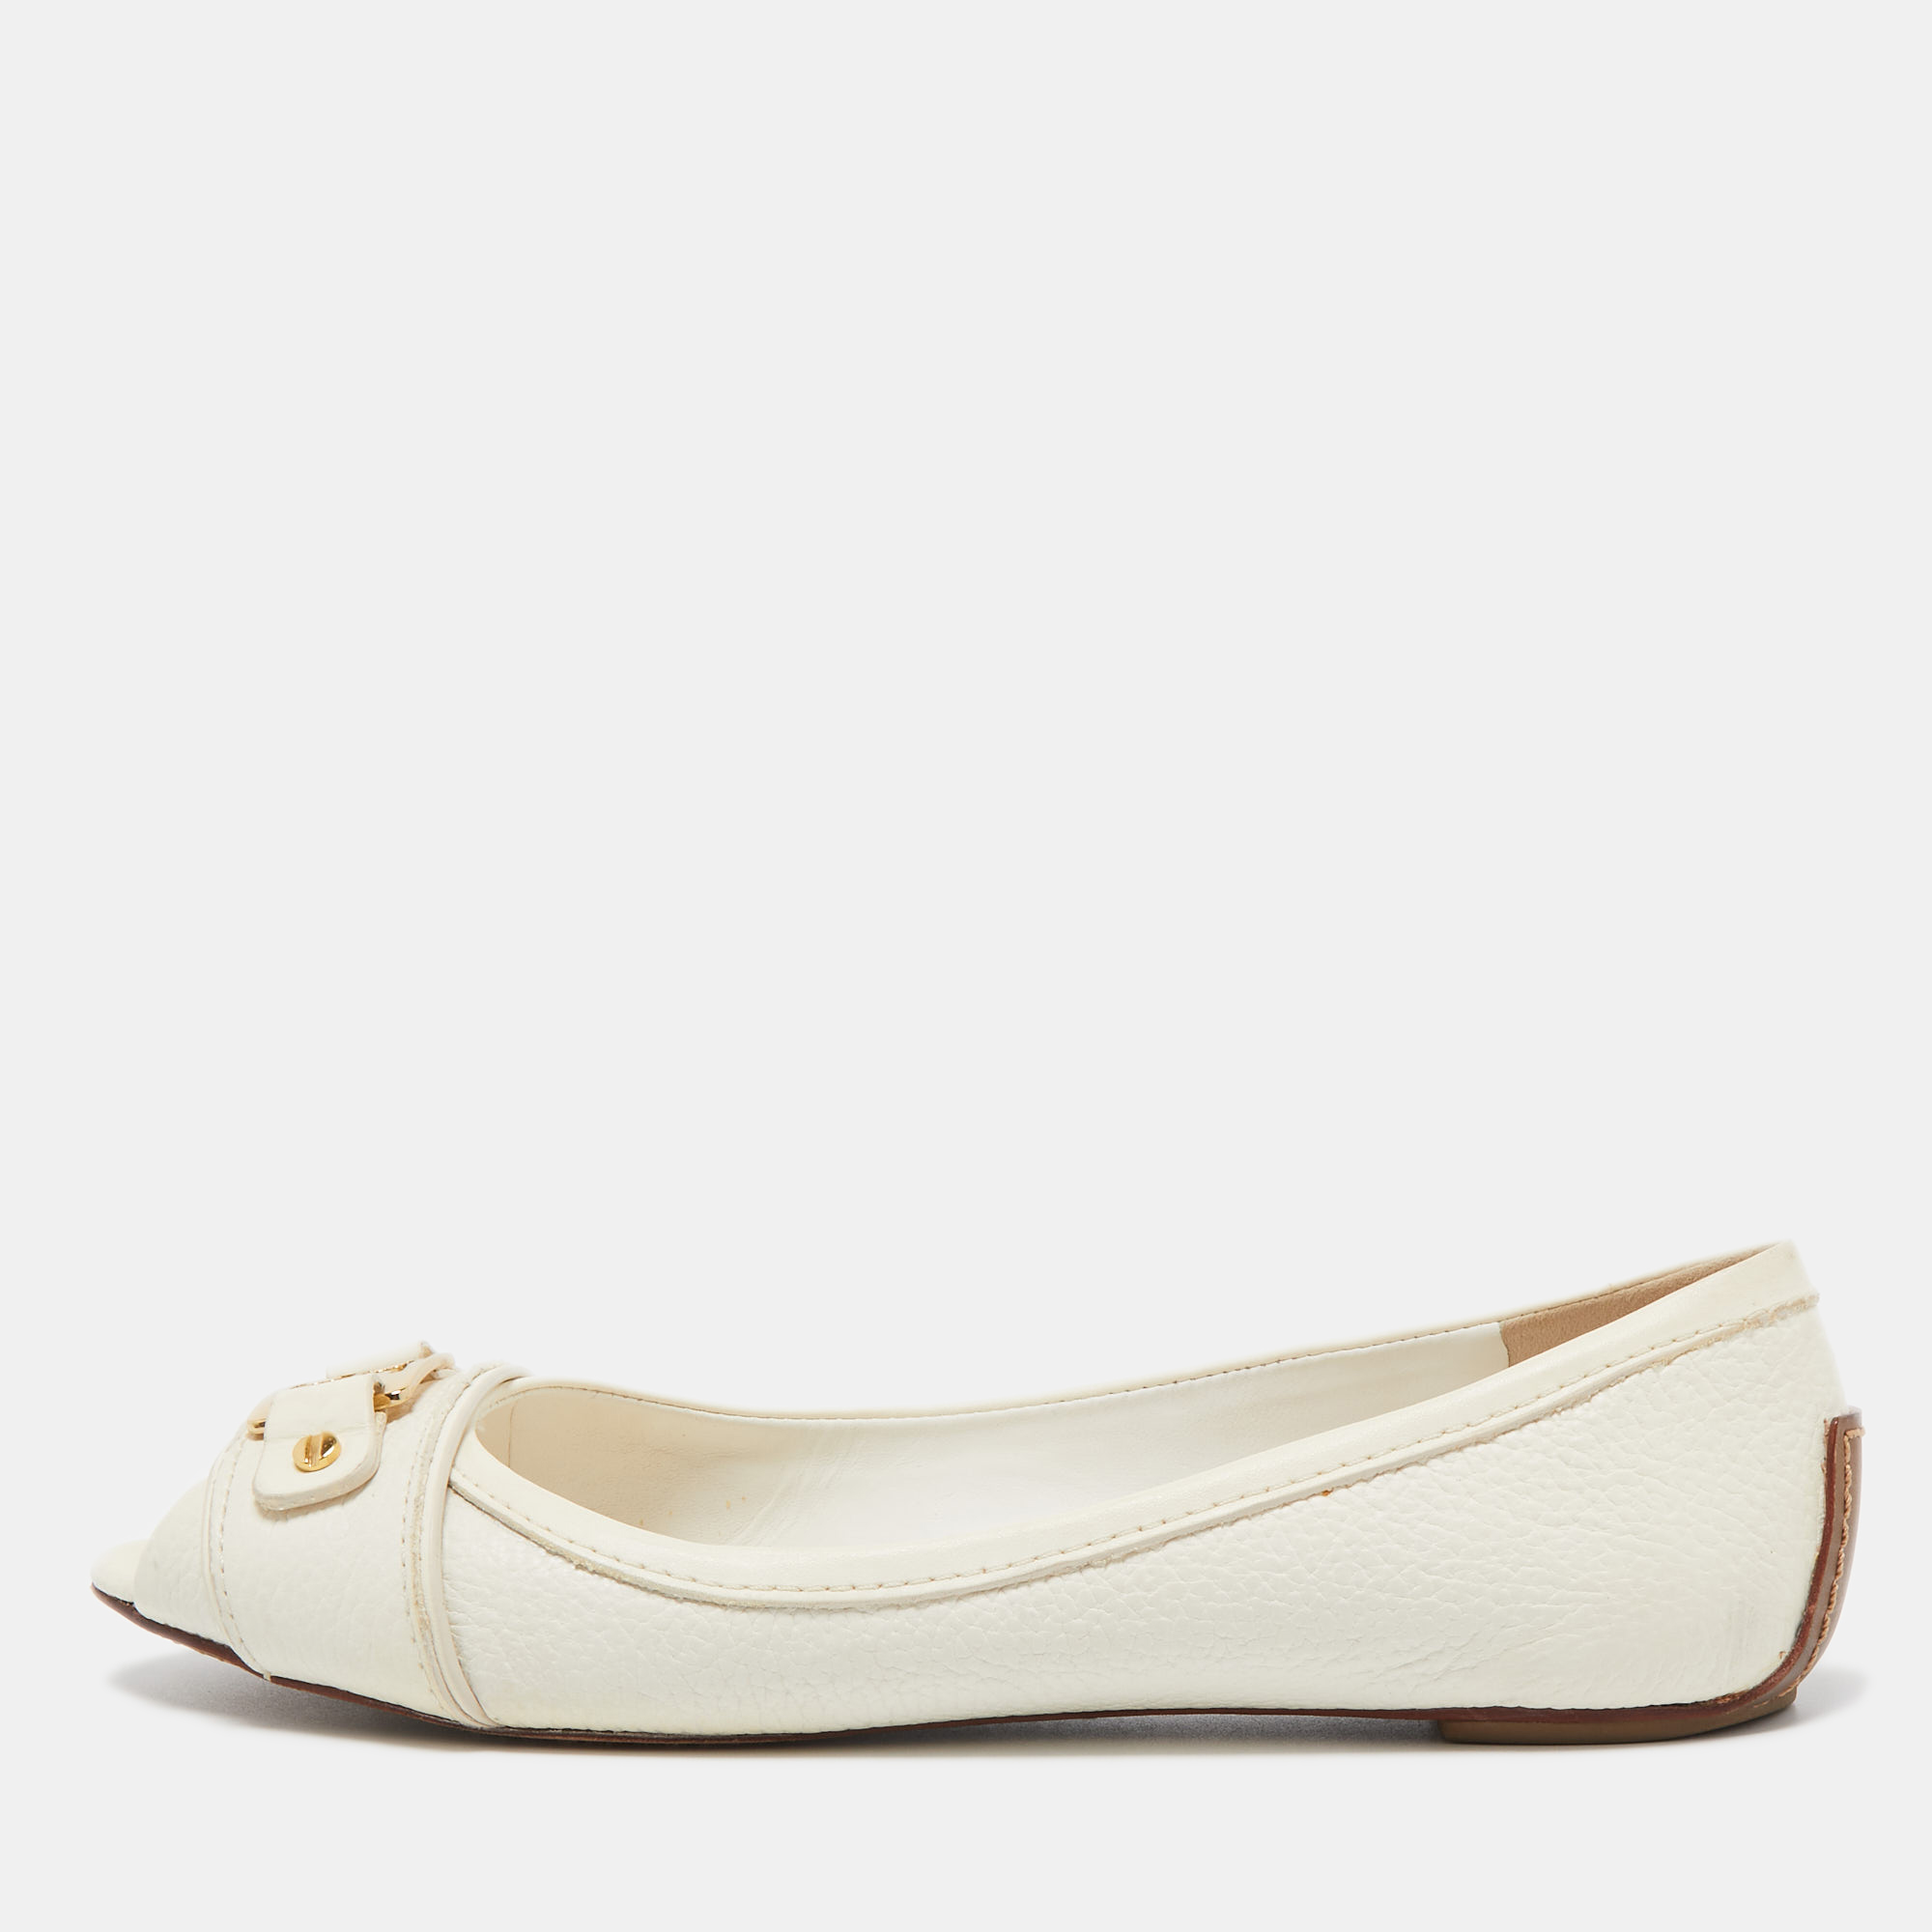 

Tory Burch Off White Leather Cline Peep Toe Flats Size 38